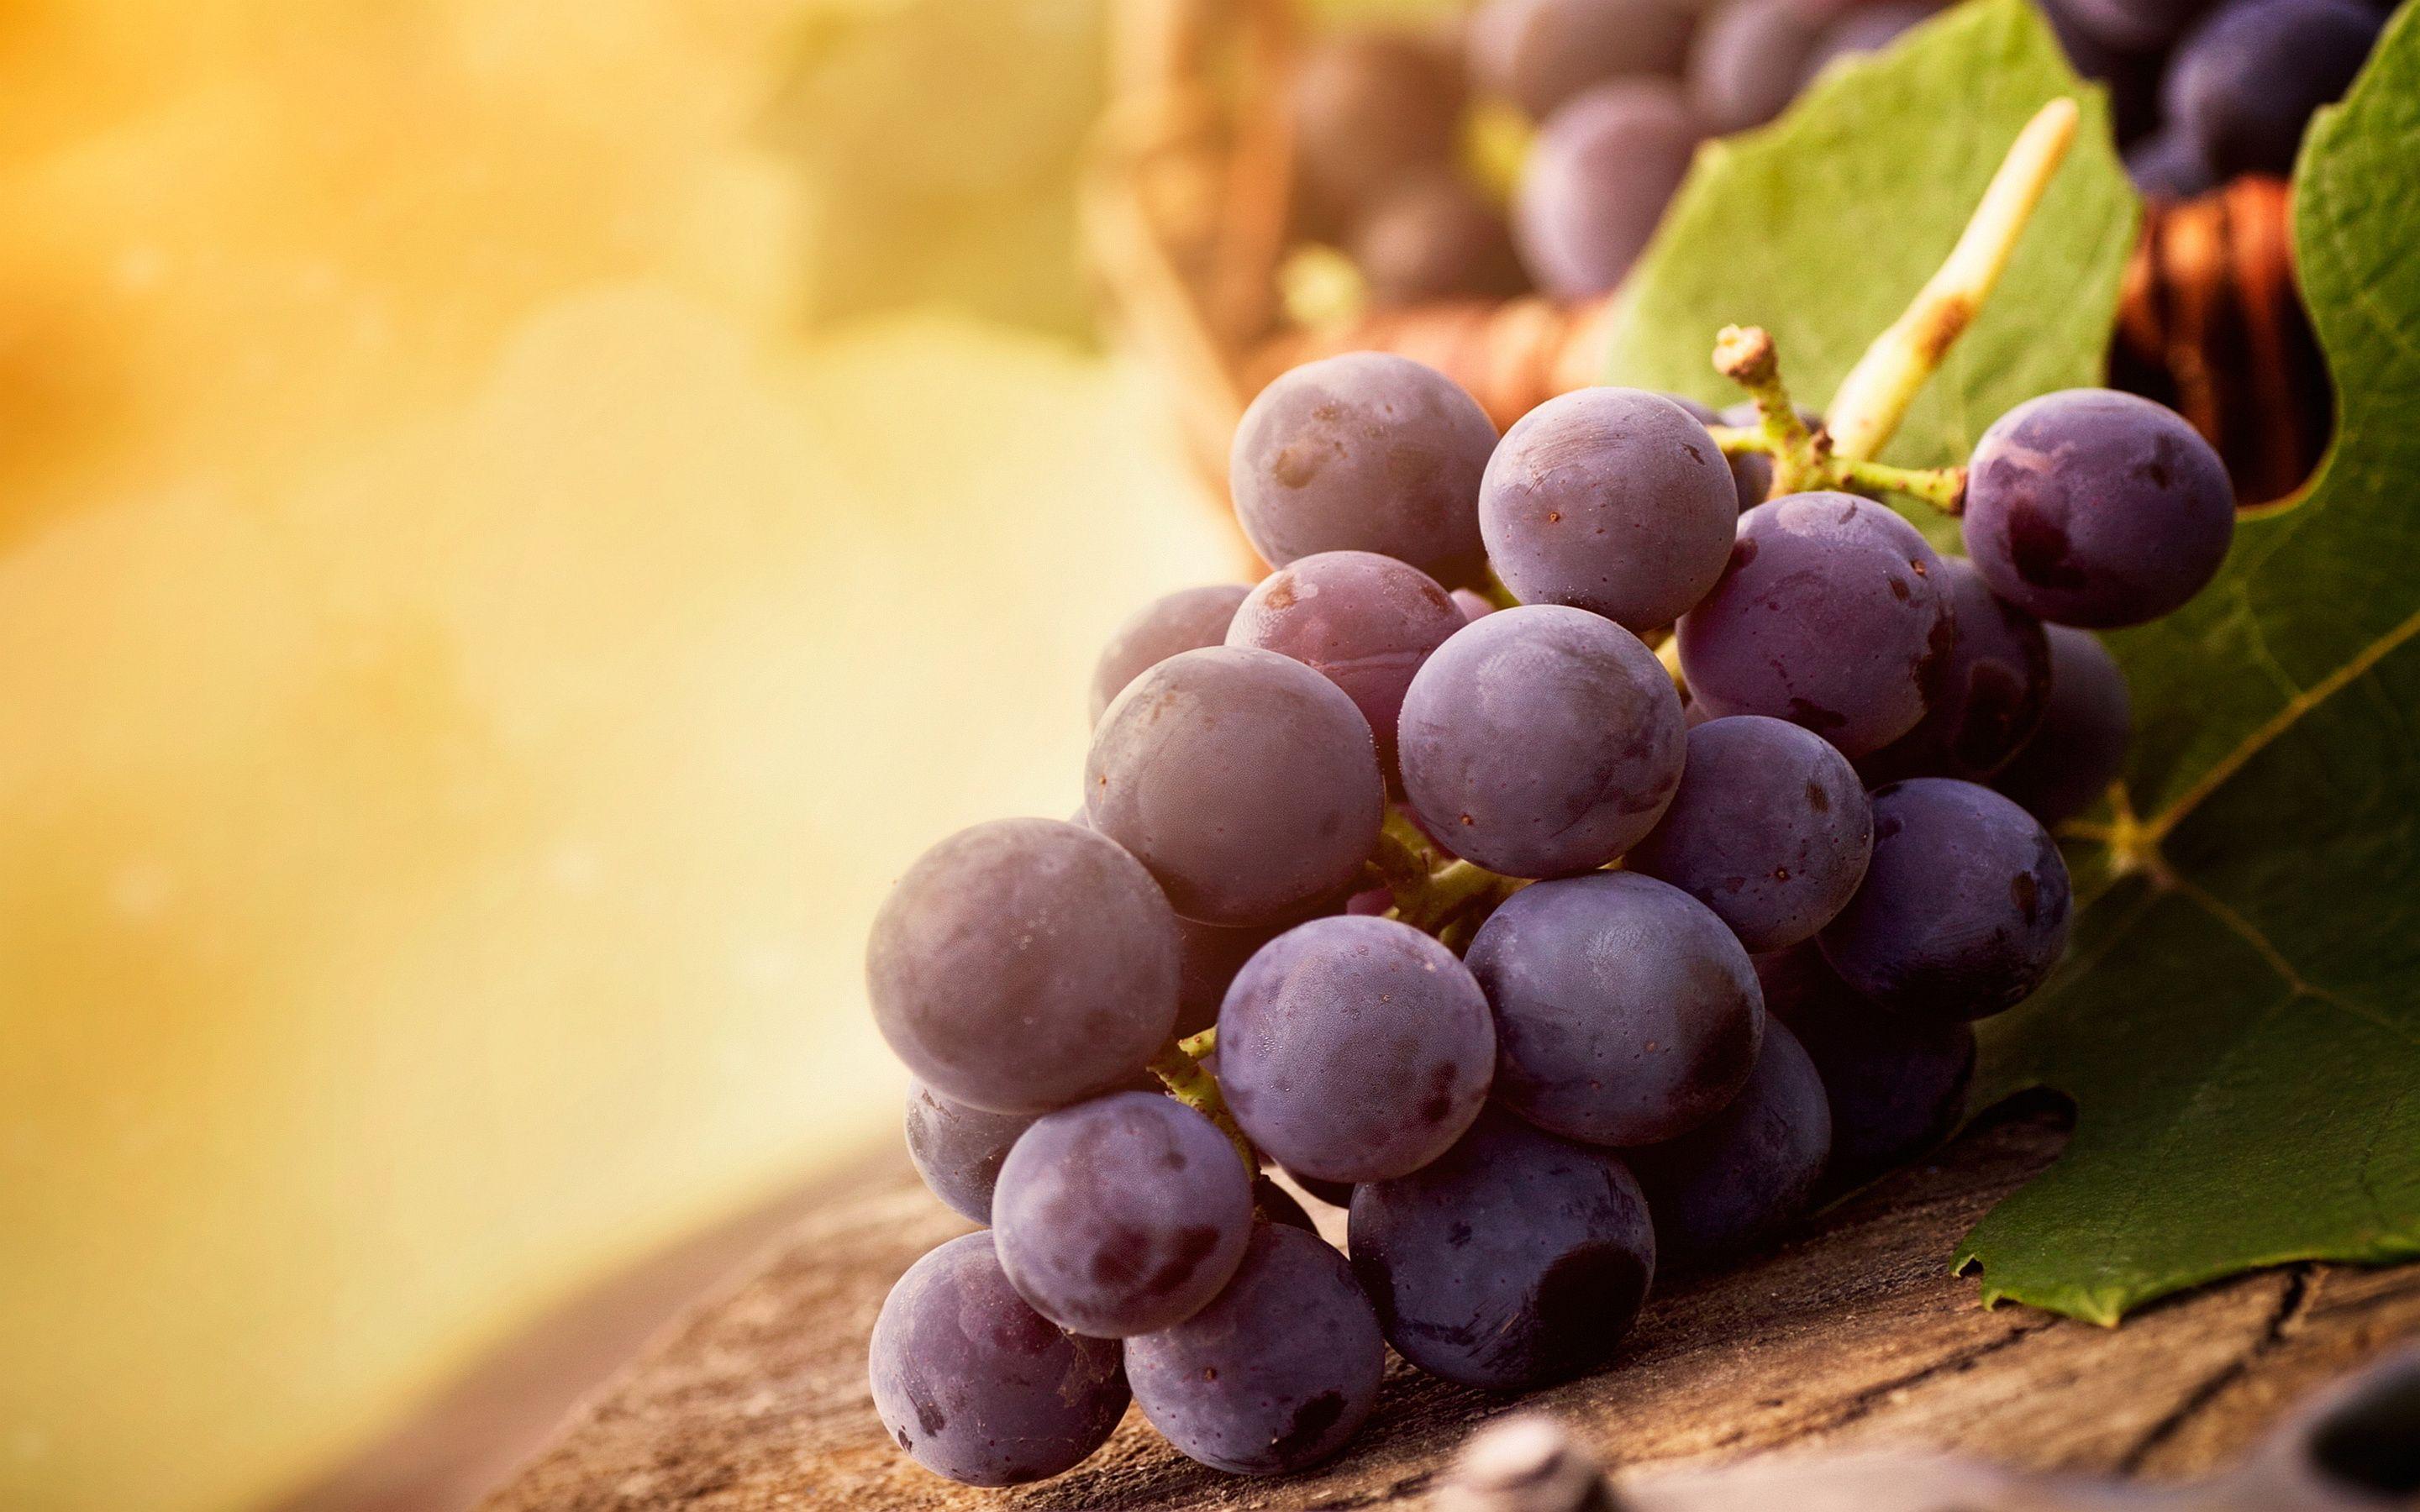 Wallpaper Blink of Grapes Wallpaper HD for Android, Windows